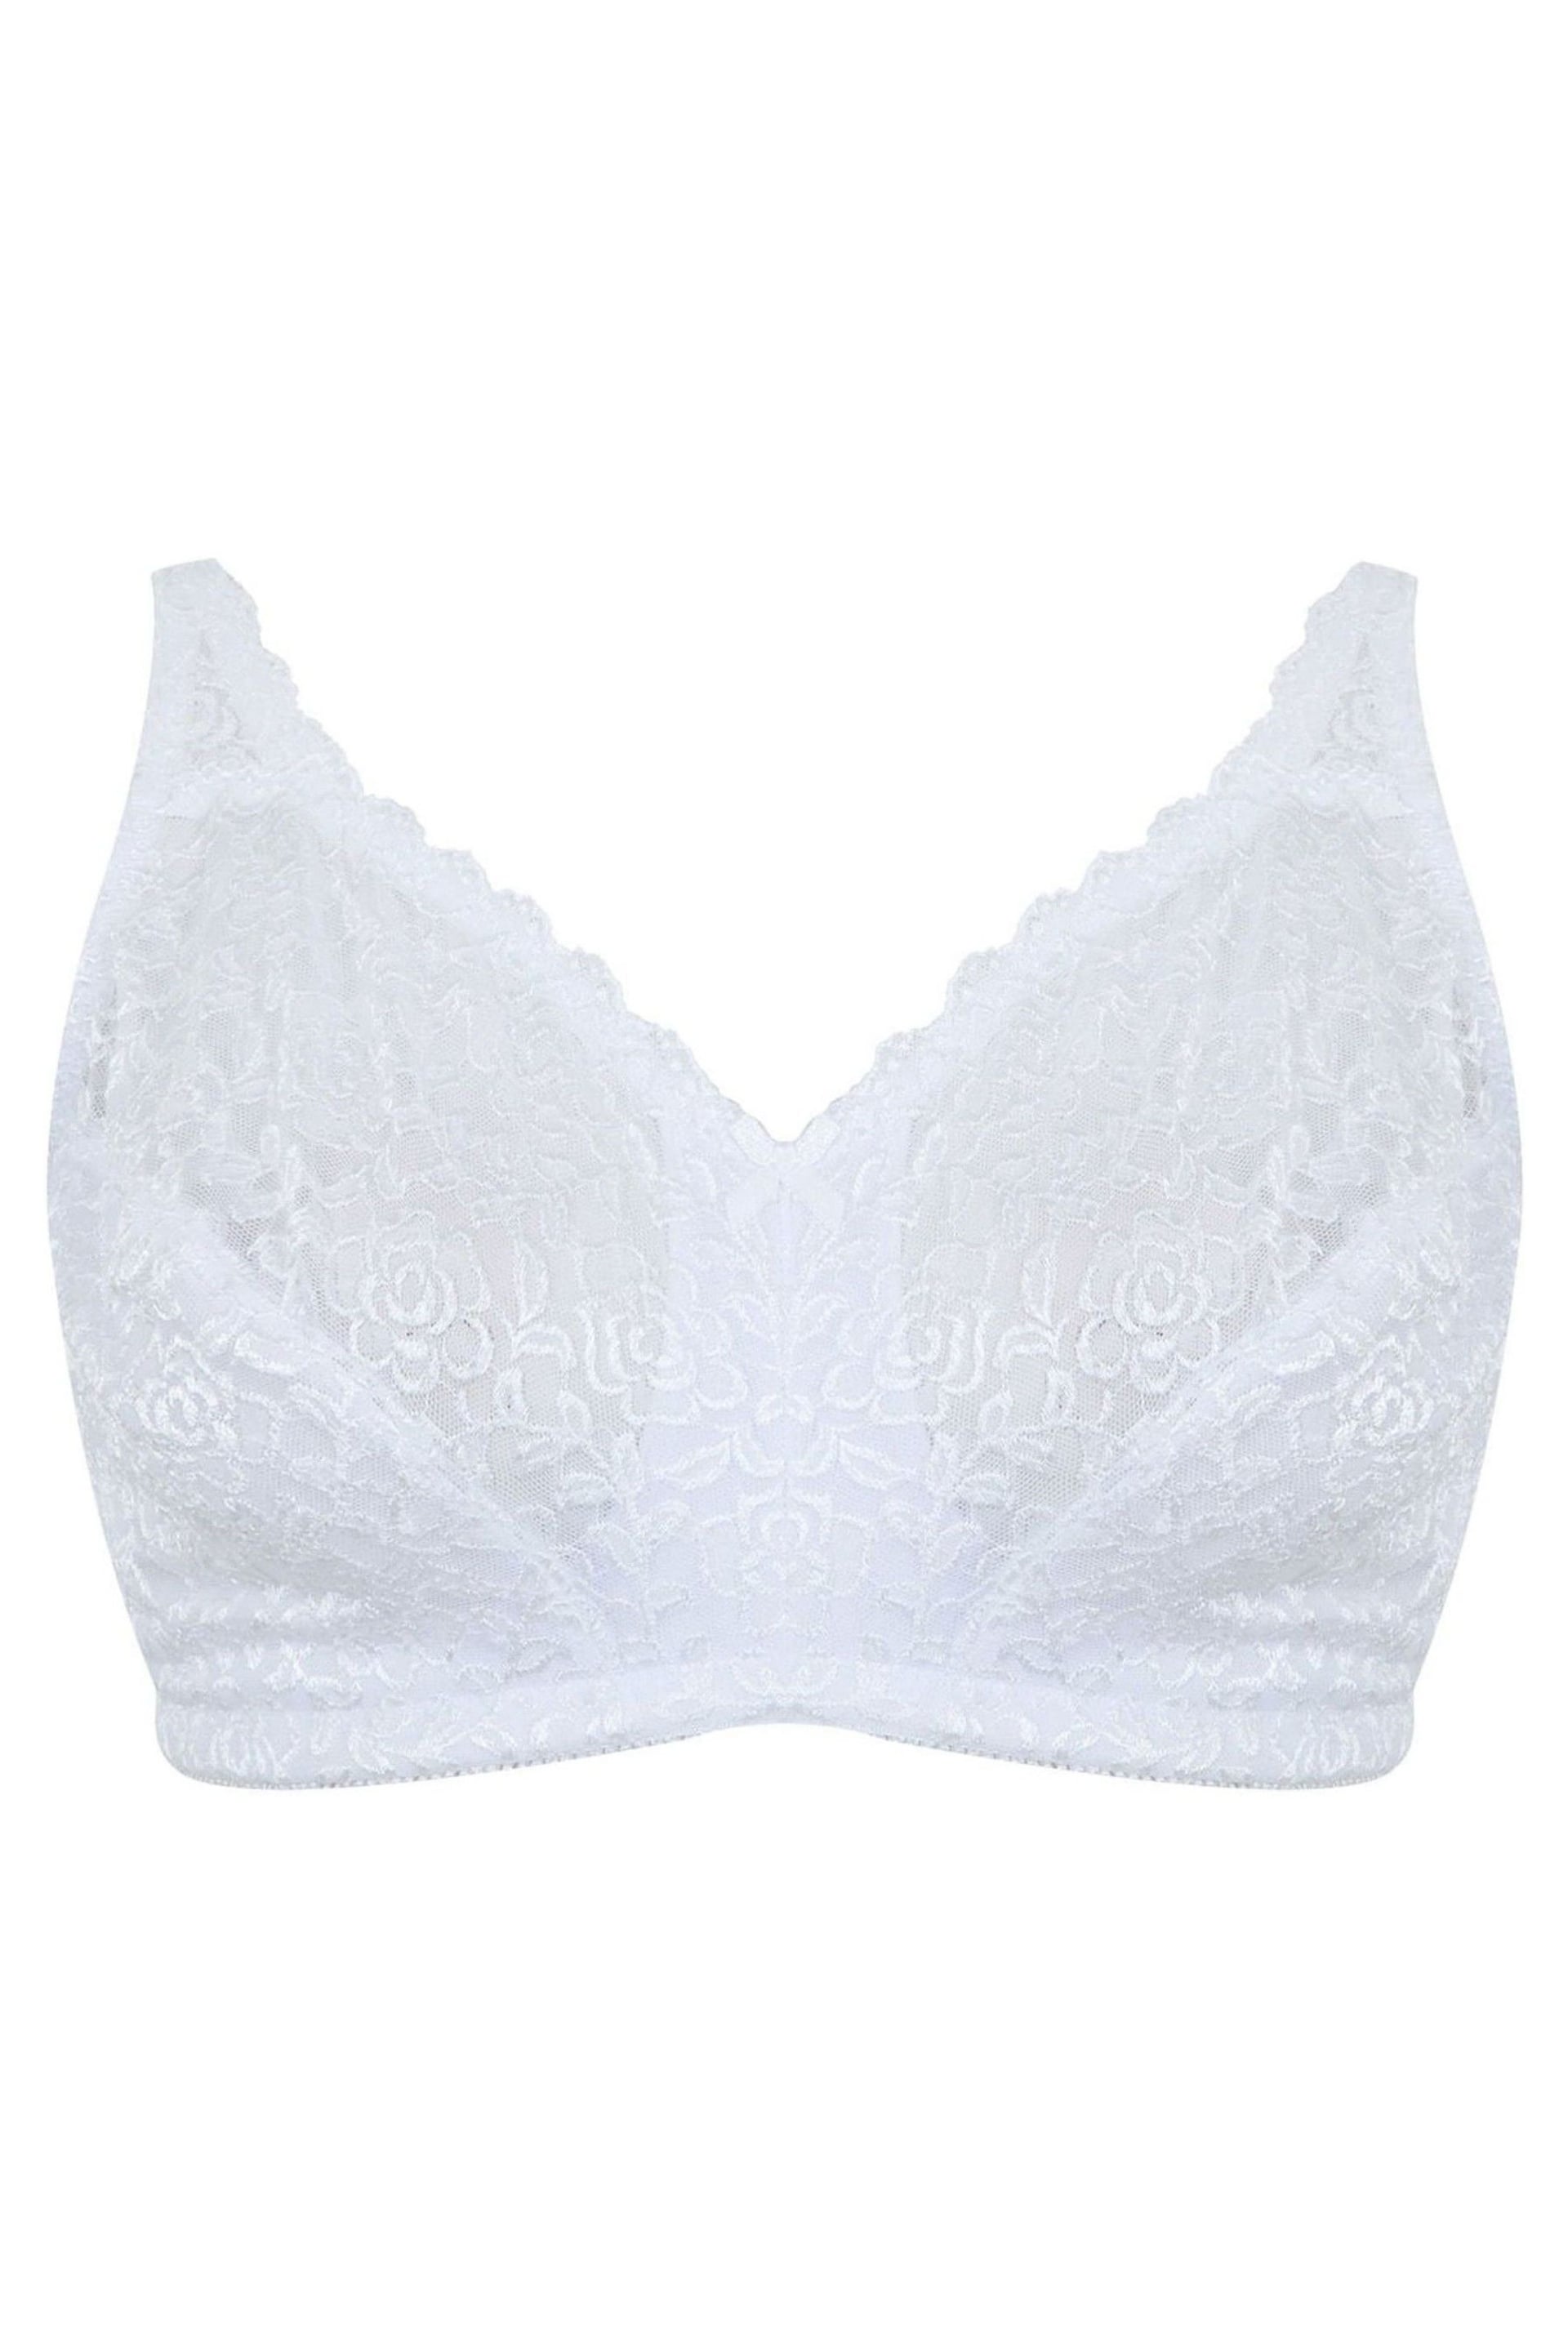 Yours Curve White Hi Shine Lace Non-Wired Bra - Image 3 of 4